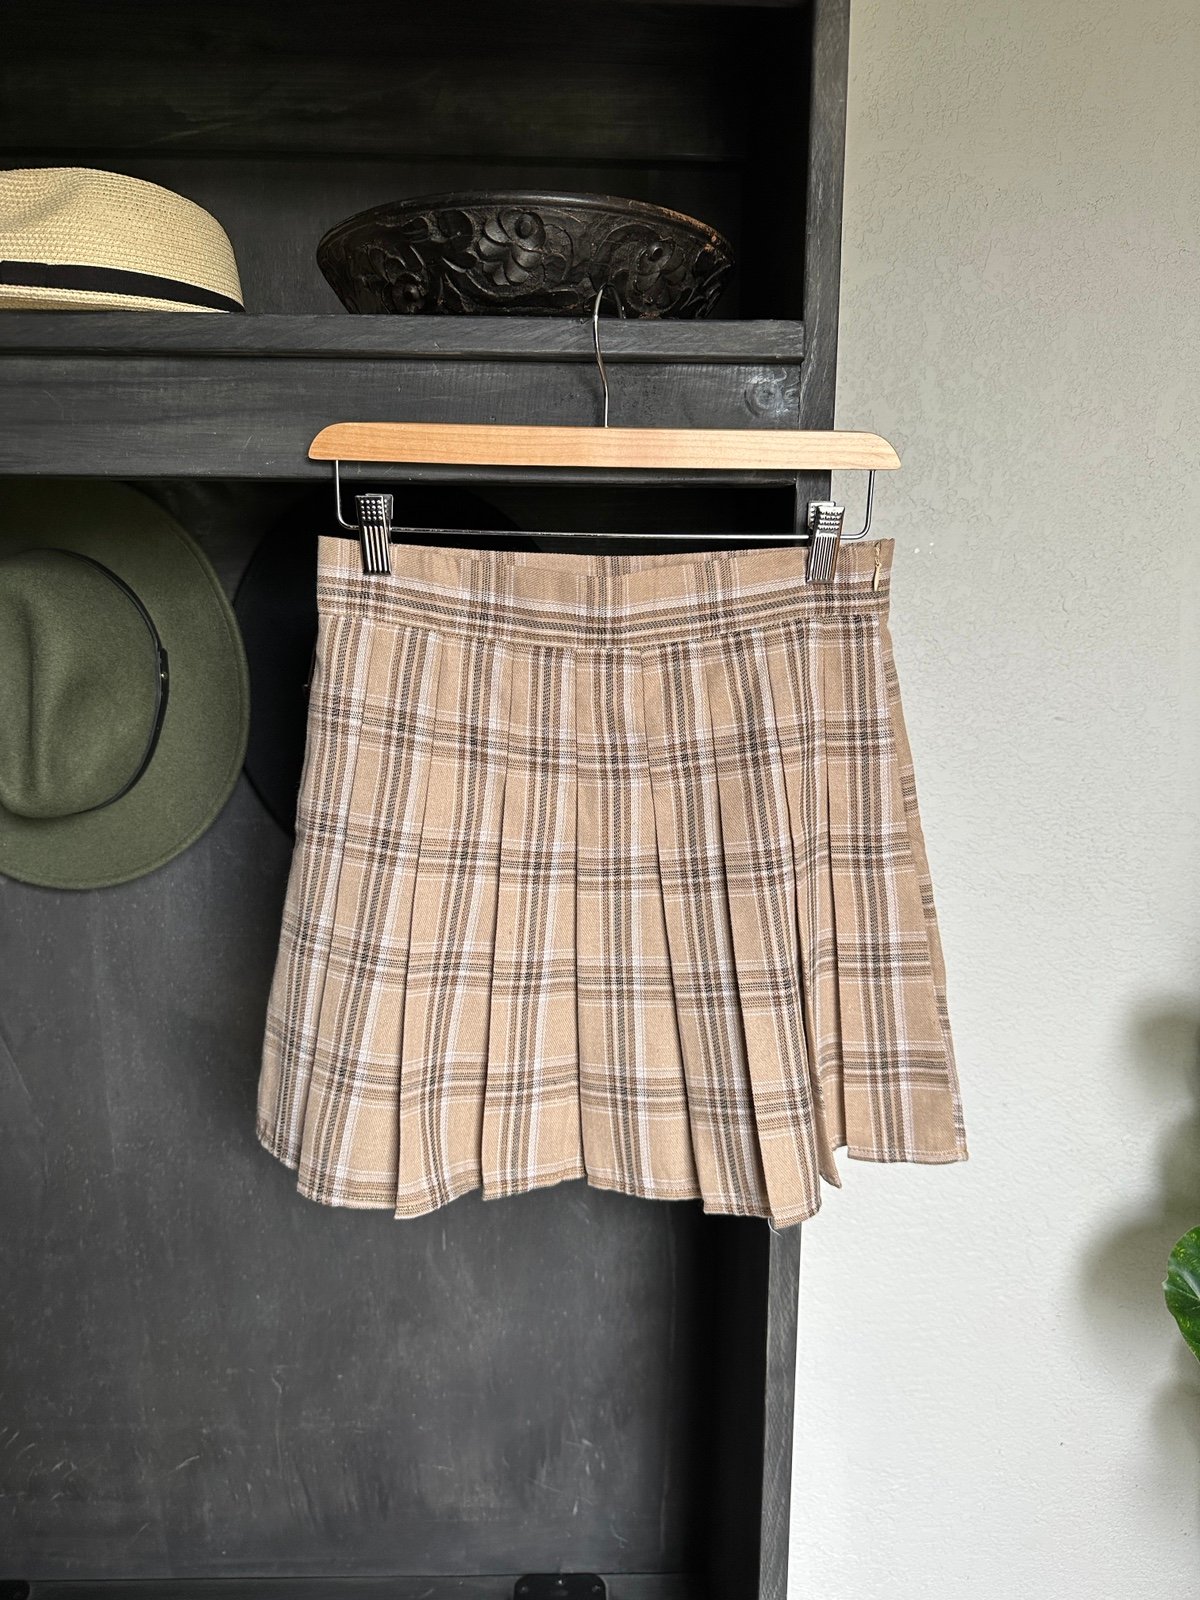 Wholesale price Womens Plaid Pleated Skirt Size Medium mHy70hXCV Everyday Low Prices